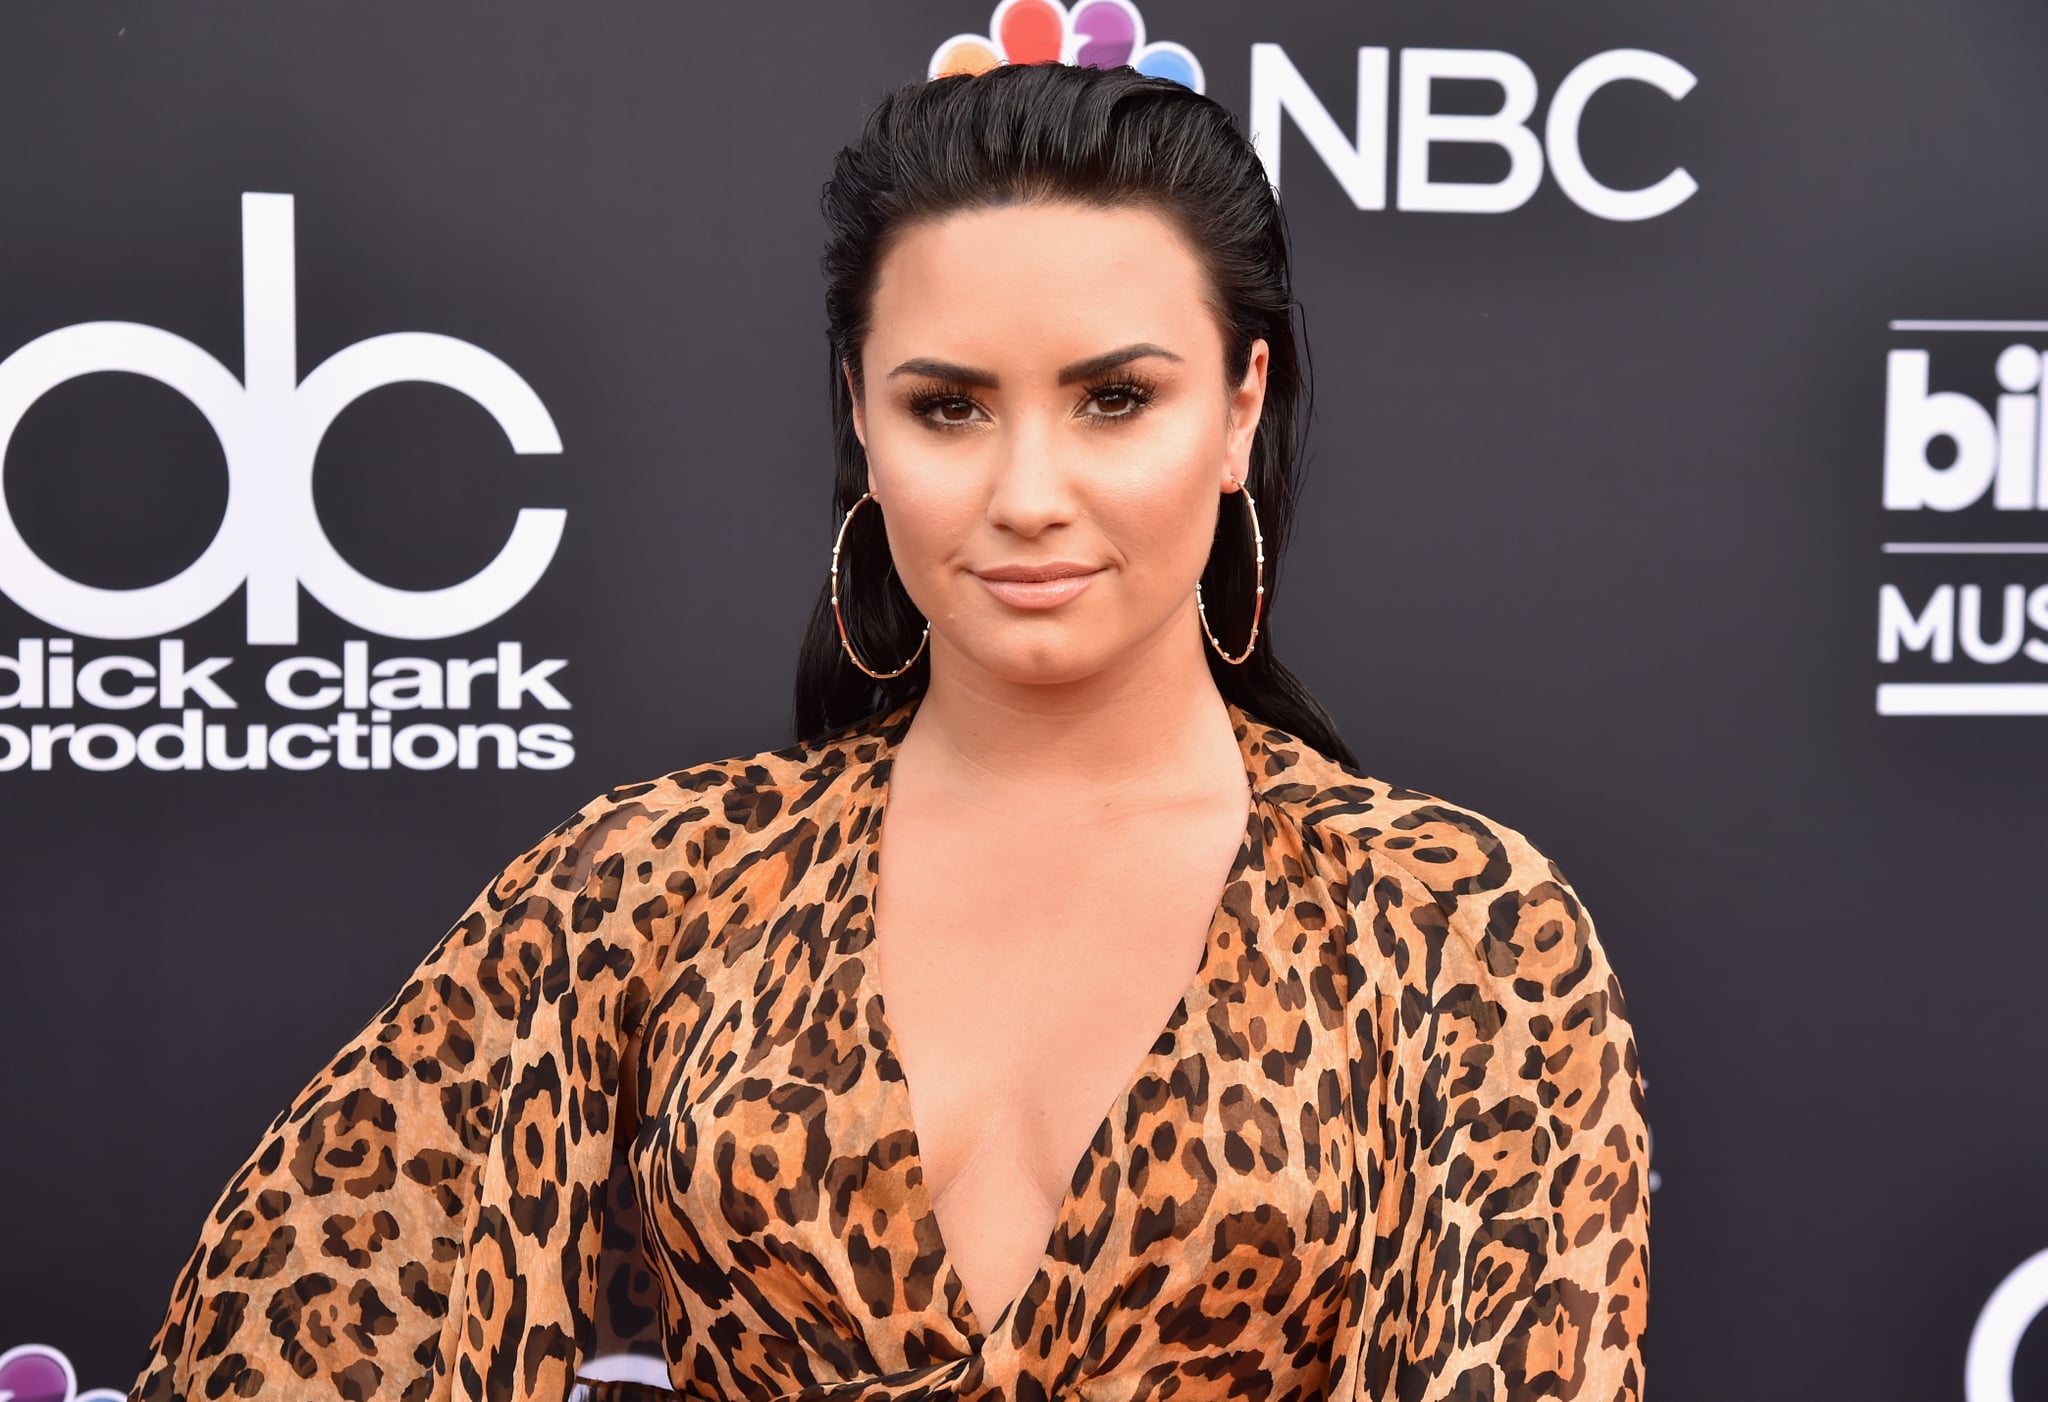 LAS VEGAS, NV - MAY 20:  Recording artist Demi Lovato attends the 2018 Billboard Music Awards at MGM Grand Garden Arena on May 20, 2018 in Las Vegas, Nevada.  (Photo by Jeff Kravitz/FilmMagic)